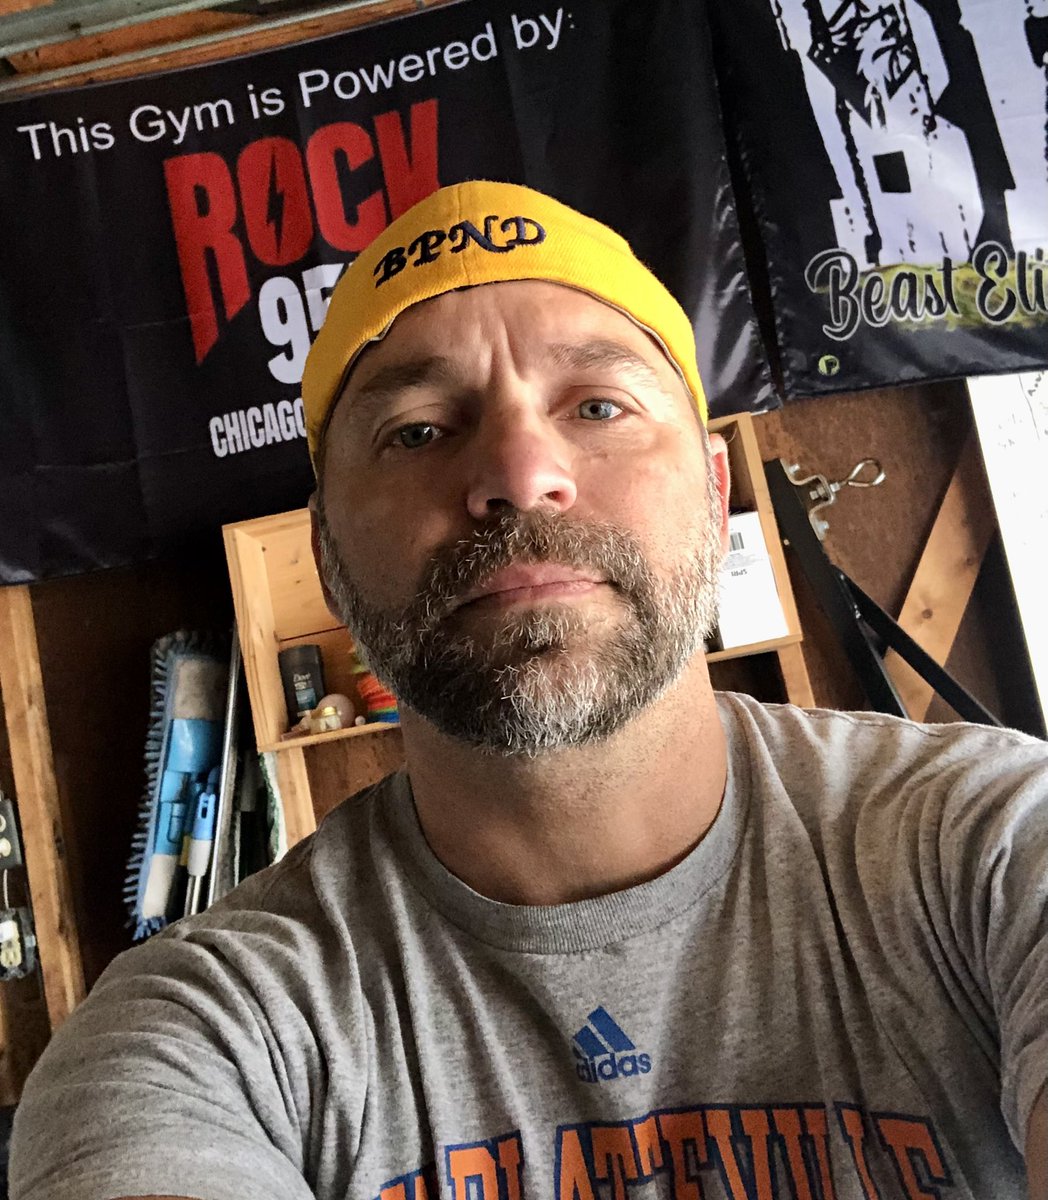 Day 50 of #75Hard challenge 
Thanks to those who have been supporting me, and thanks to my workout soundtrack every morning @Rock955CHI @angitaylorshow @WhoisMarris @abekanan